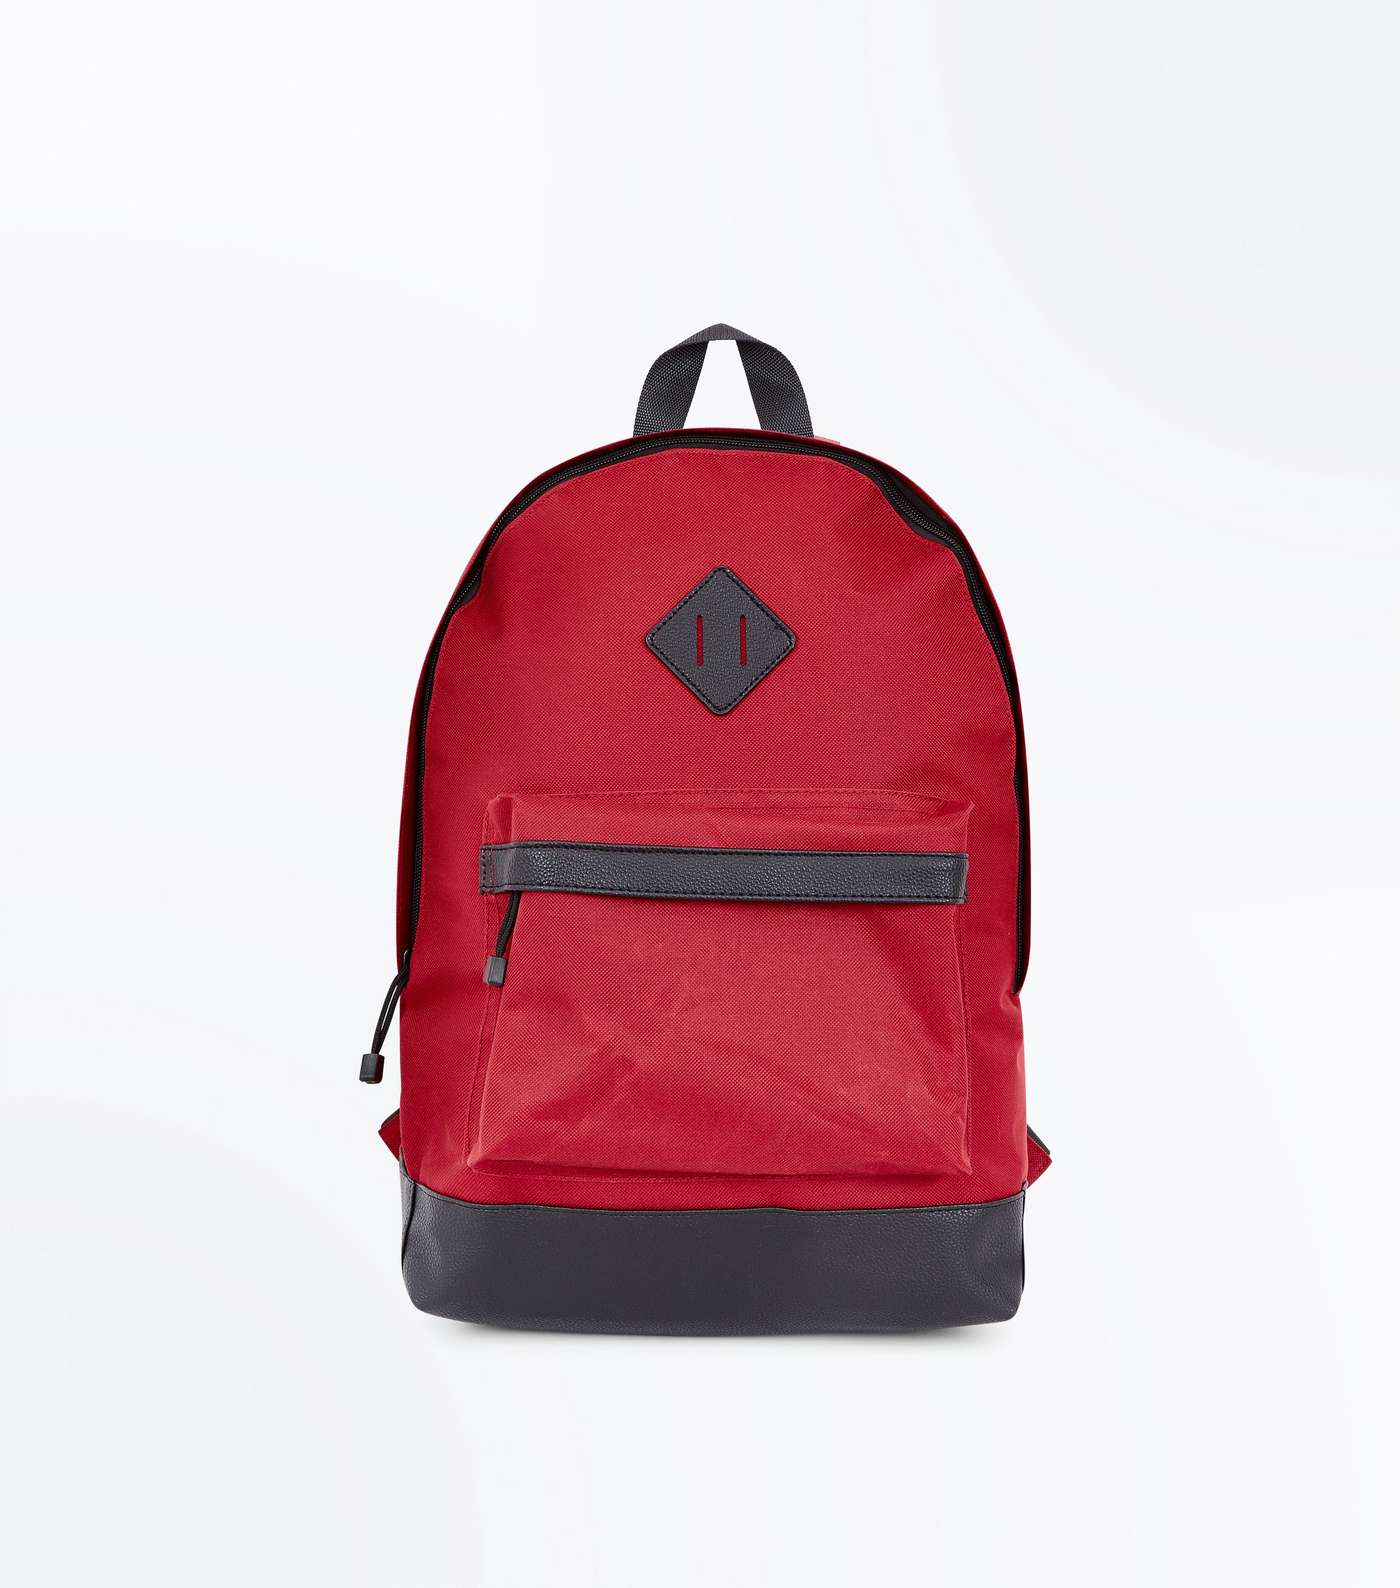 Red Top Handle Backpack